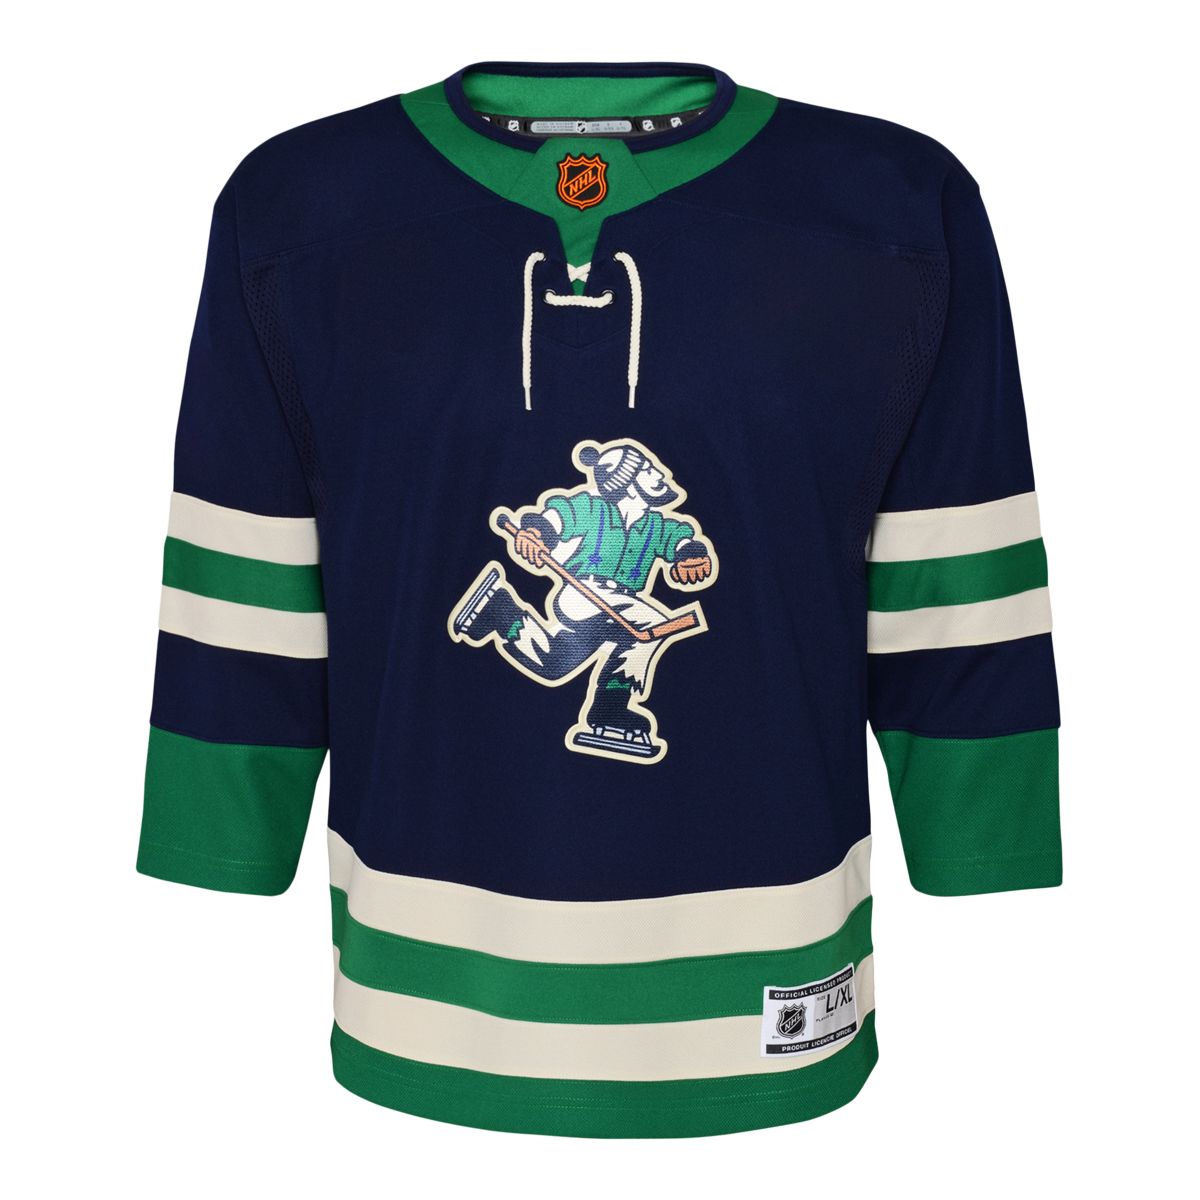  Outerstuff NHL NHL Vancouver Canucks Kids & Youth